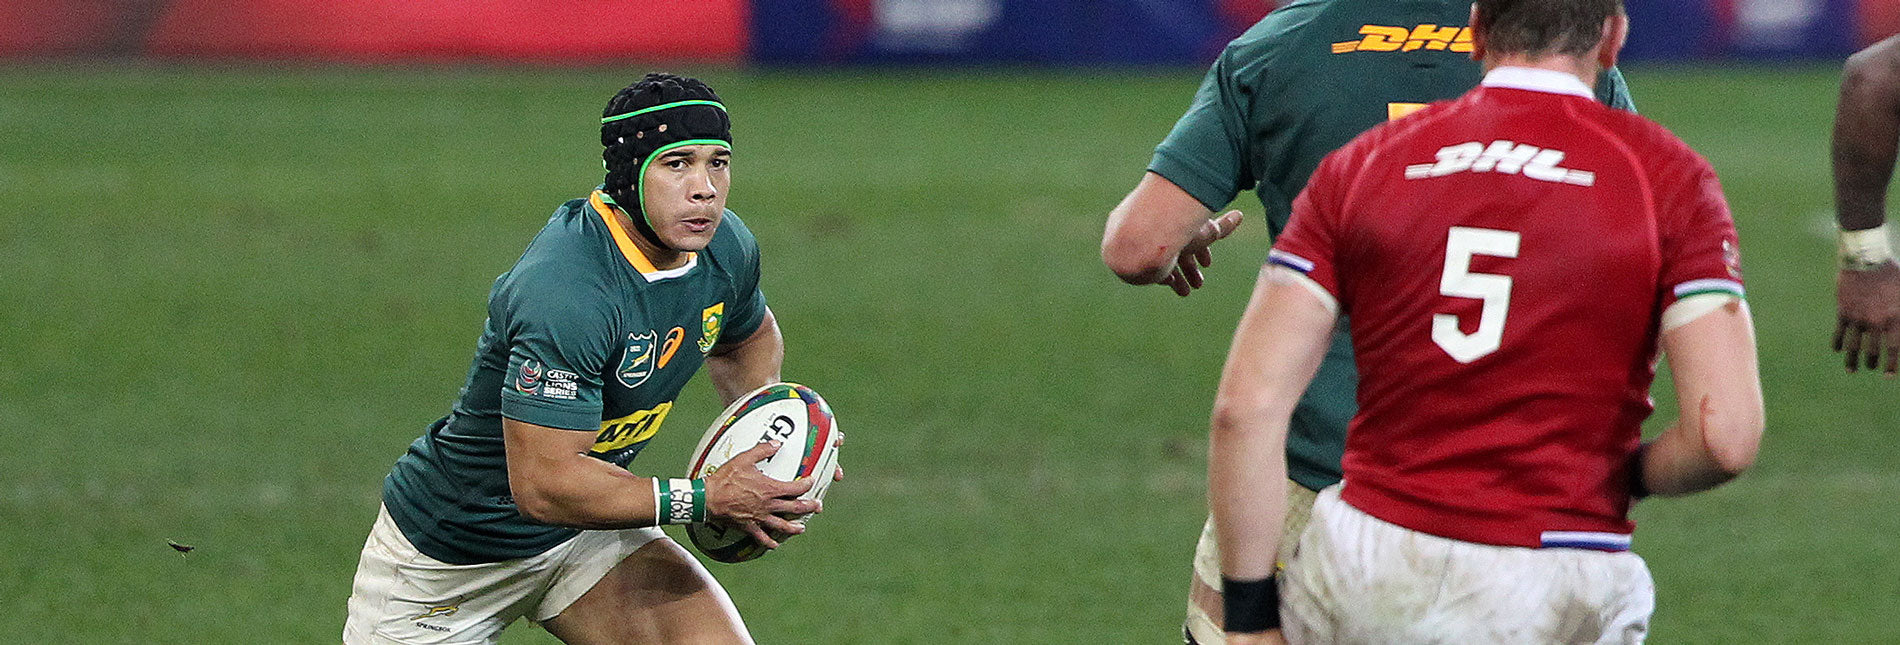 GLOBAL RUGBY STAR AND RUGBY WORLD CUP WINNER CHESLIN KOLBE JOINS THE GILBERT RUGBY FAMILY